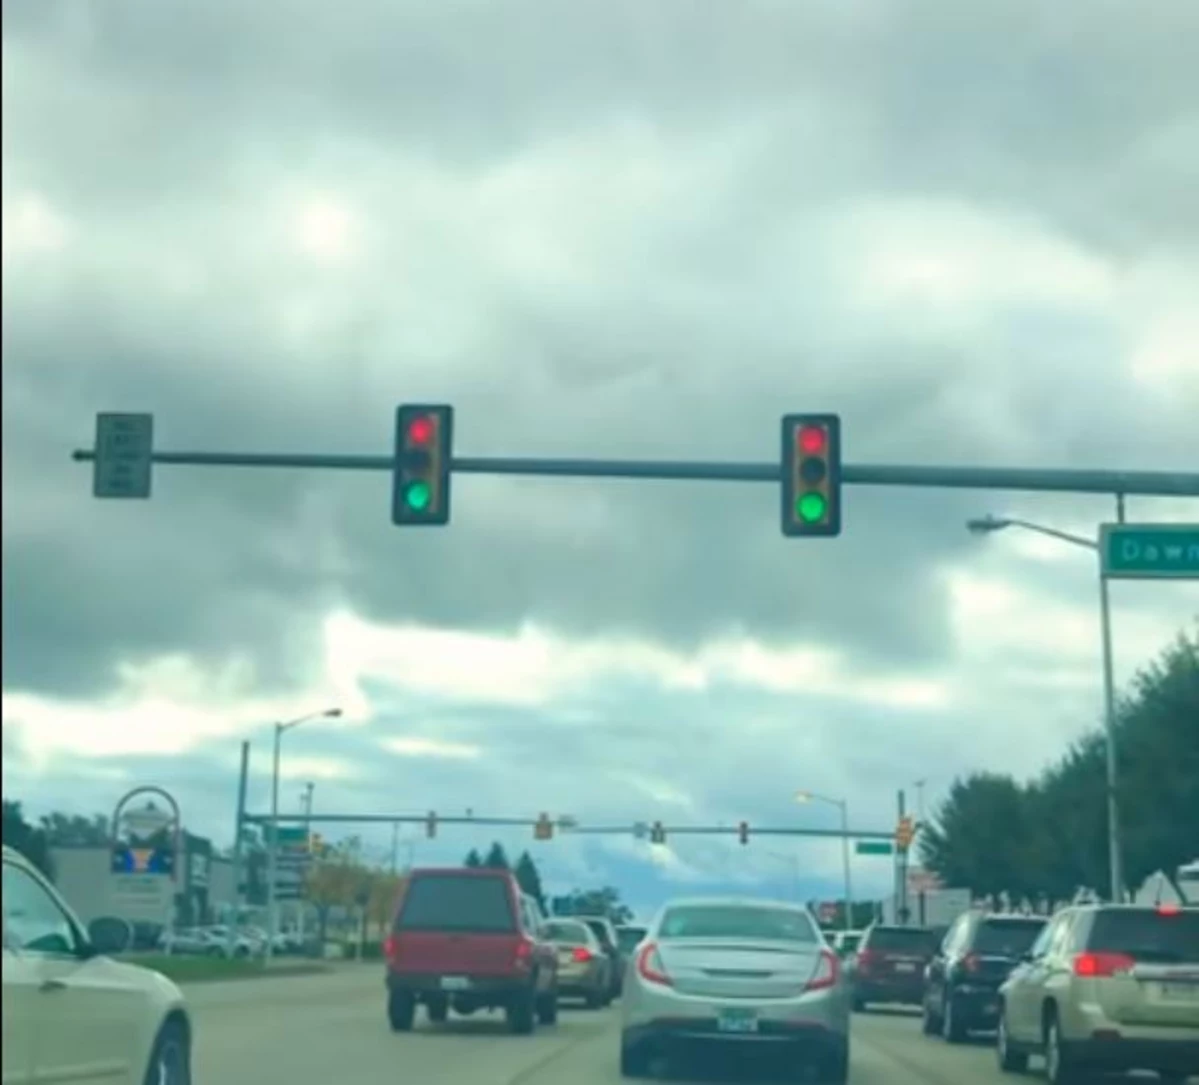 Have You Seen Traffic Lights Do This In Portage